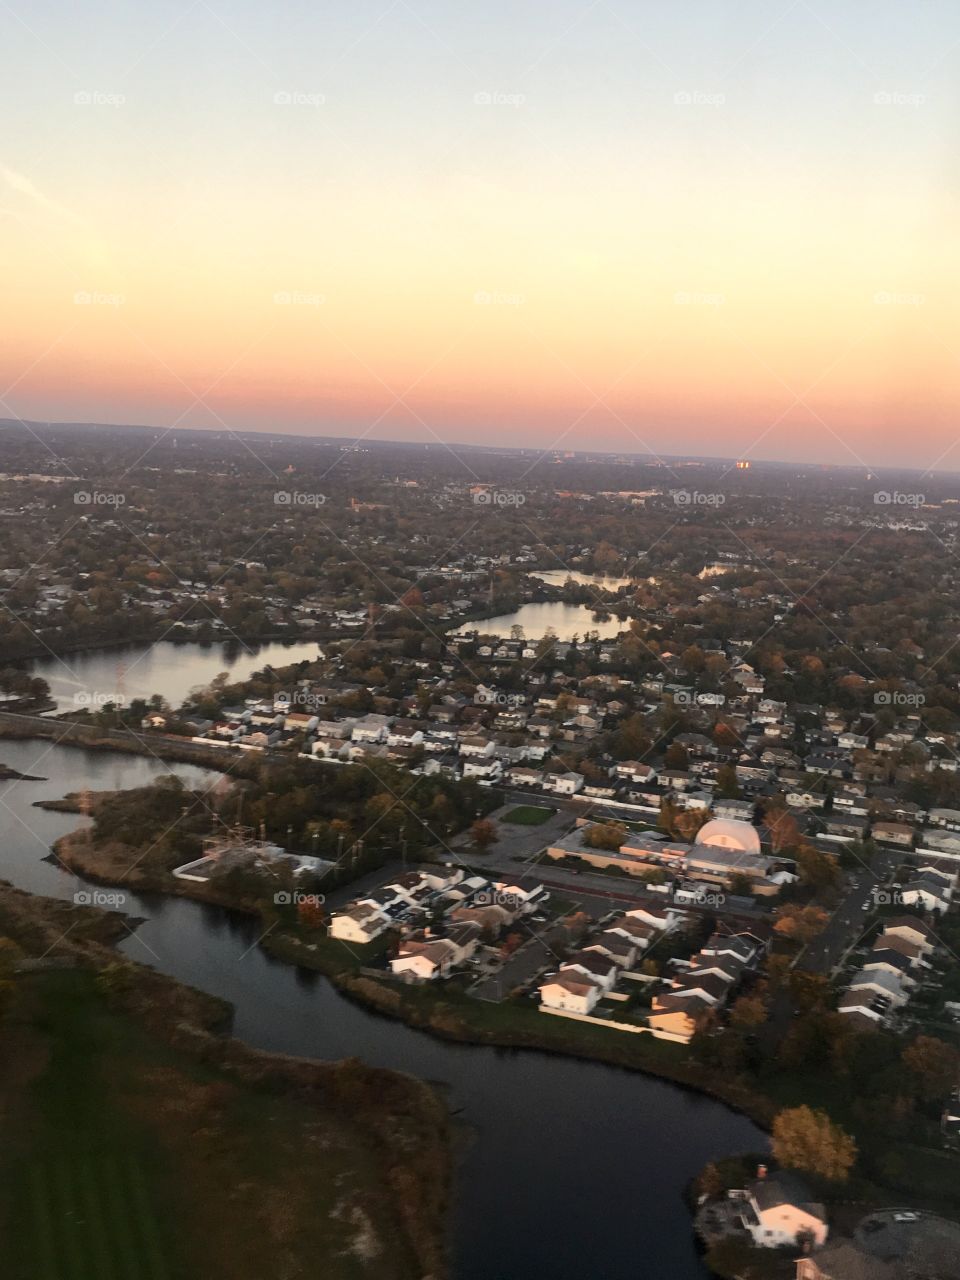 A view of a suburban town at sunset from an airplane 